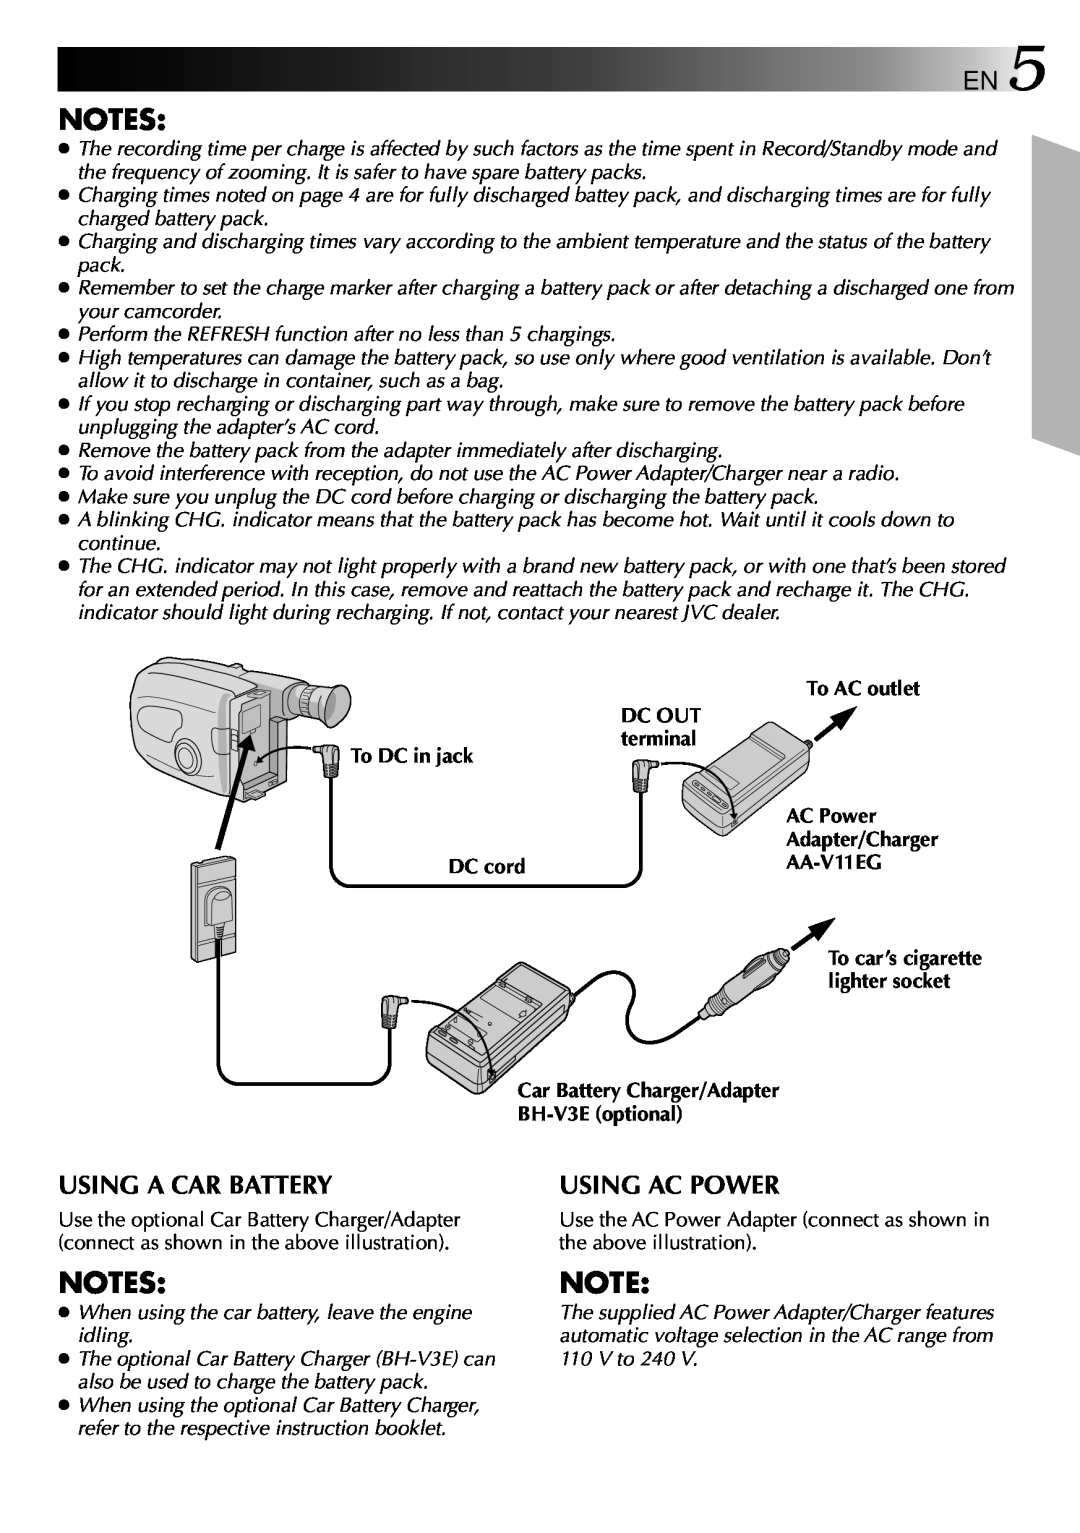 JVC LYT0002-082A manual Using A Car Battery, Using Ac Power, To AC outlet DC OUT terminal To DC in jack, AC Power, DC cord 